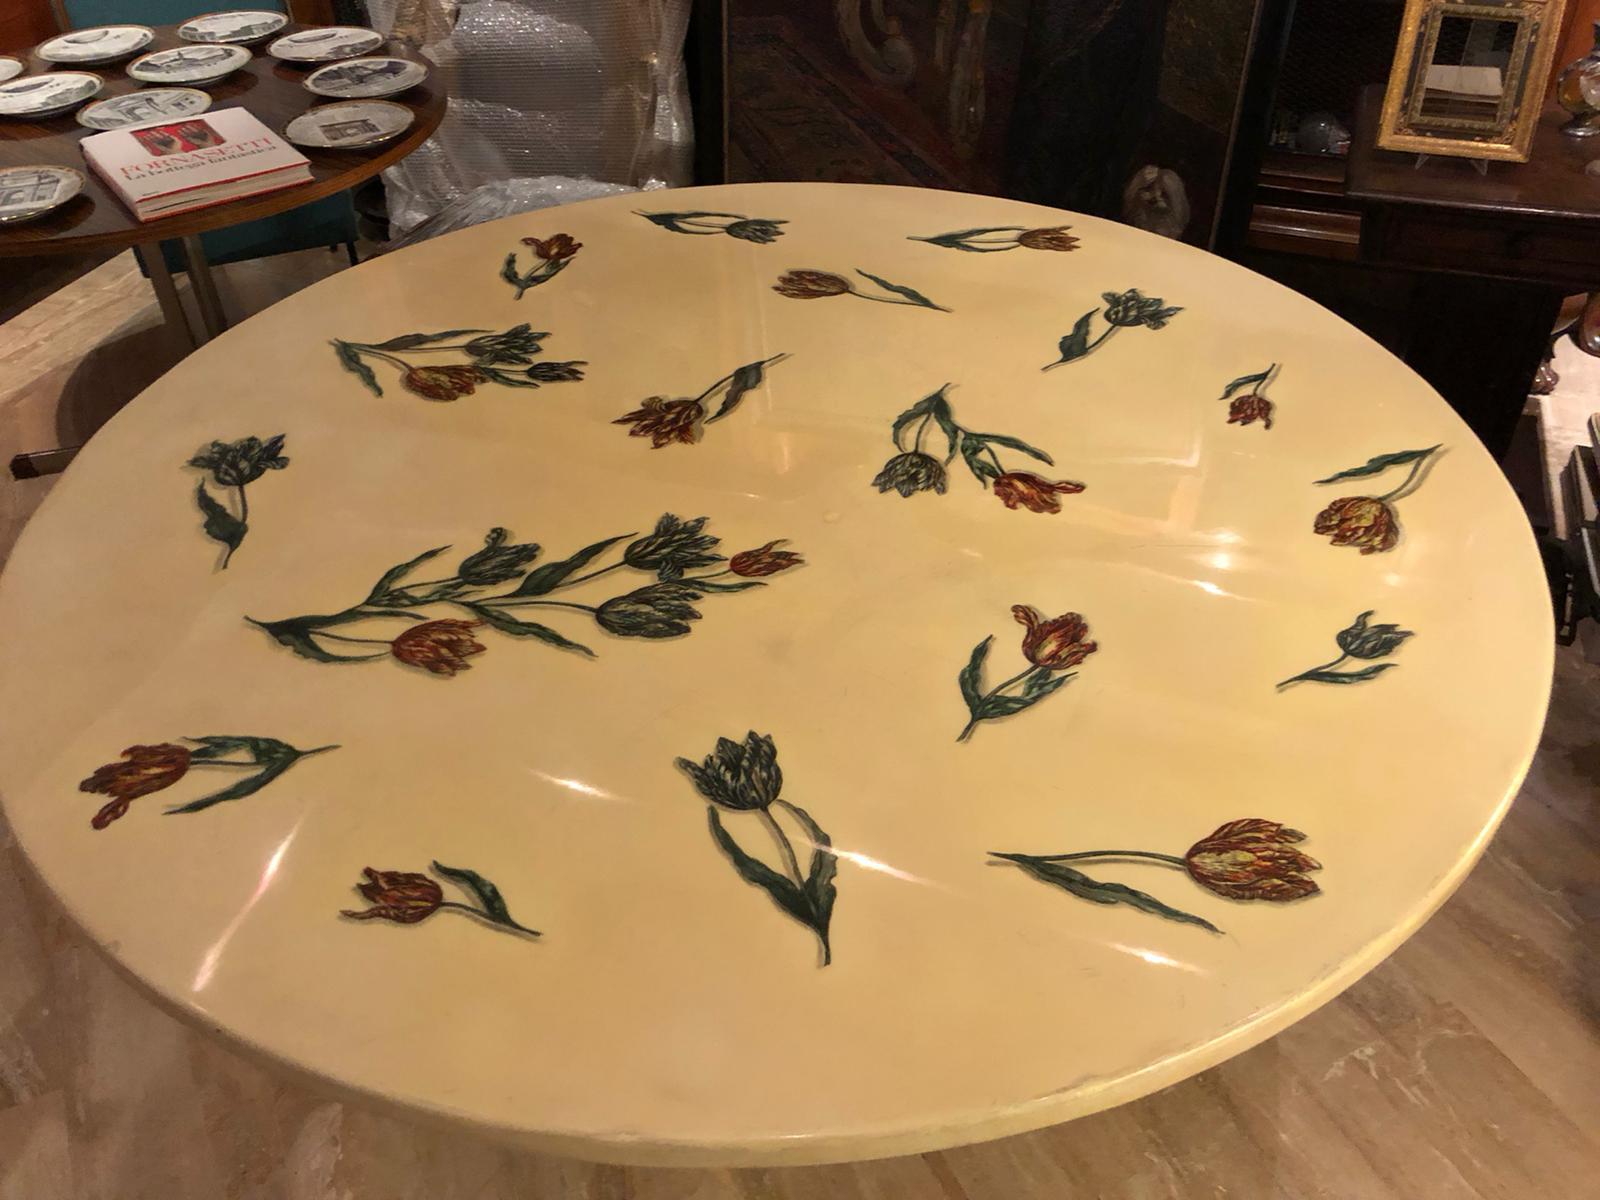 Large round and amazing dining table designed by Piero Fornasetti, with black painted metal base and resin top decorated with tulips, designed by Piero Fornasetti in the 1950s. Unique piece.
Adhesive label under the top.

Please note that the